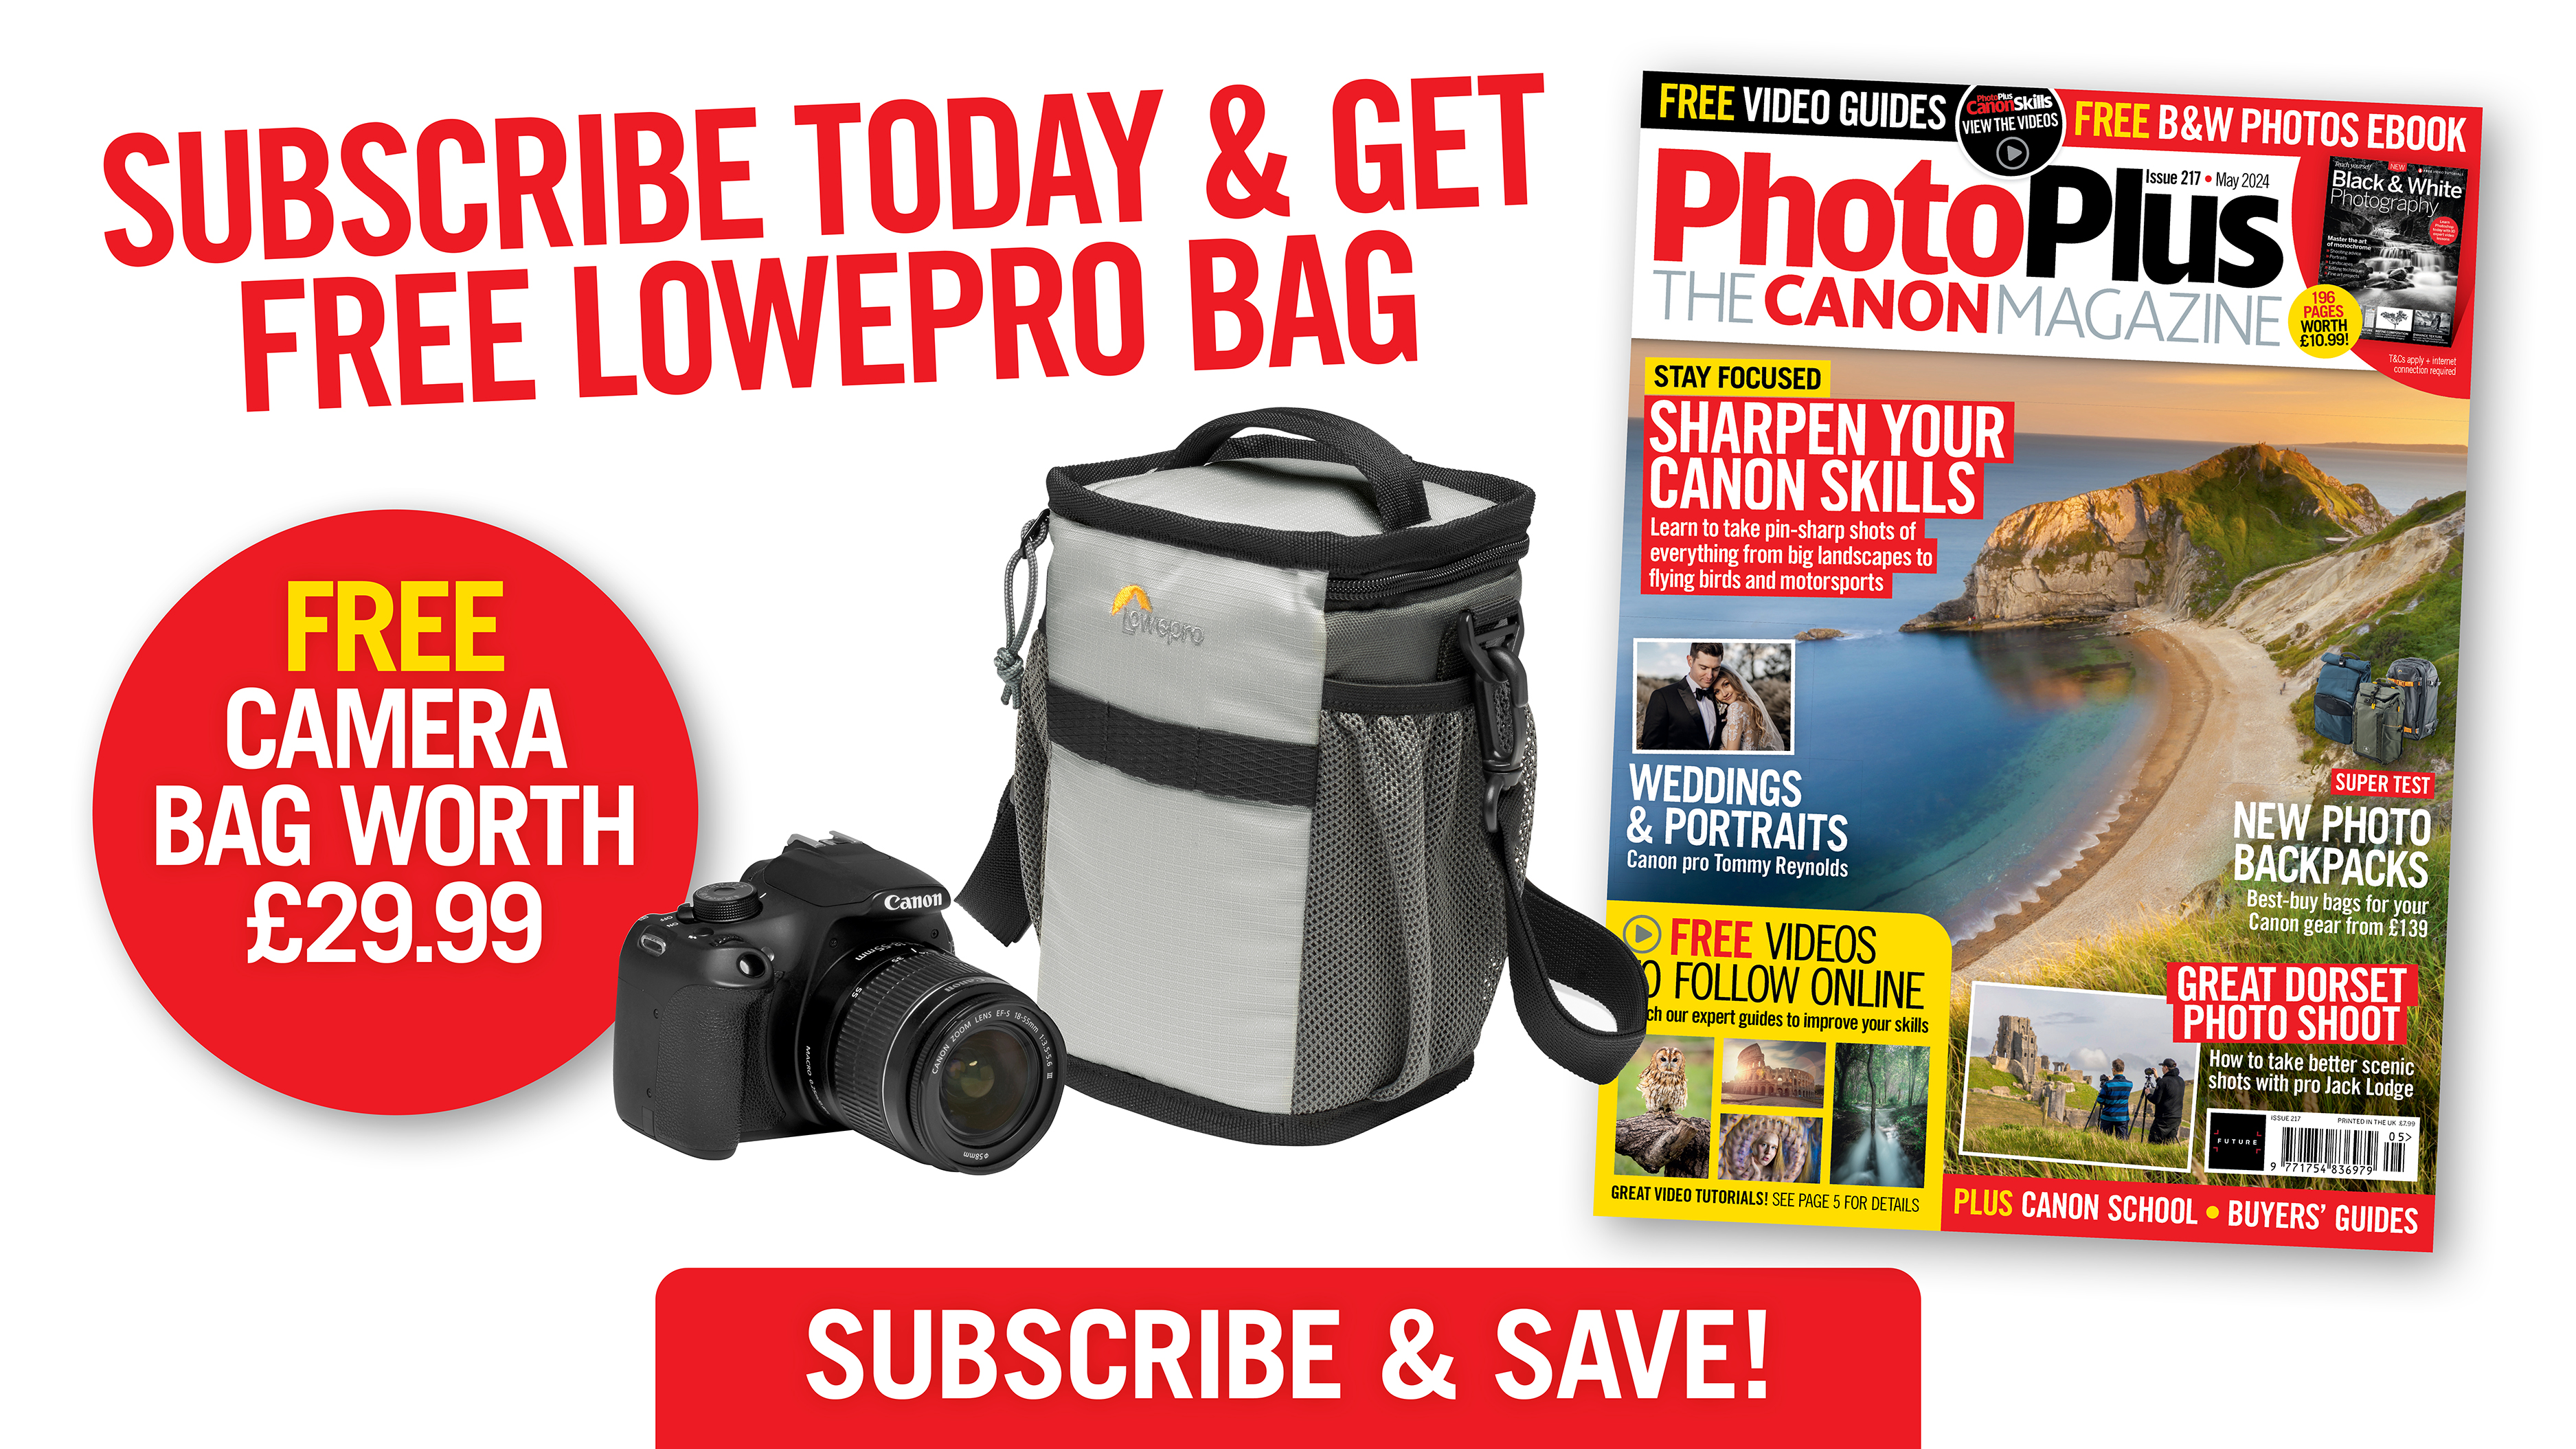 New PhotoPlus: The Canon Magazine May issue 217 – free Lowepro bag when you subscribe today!